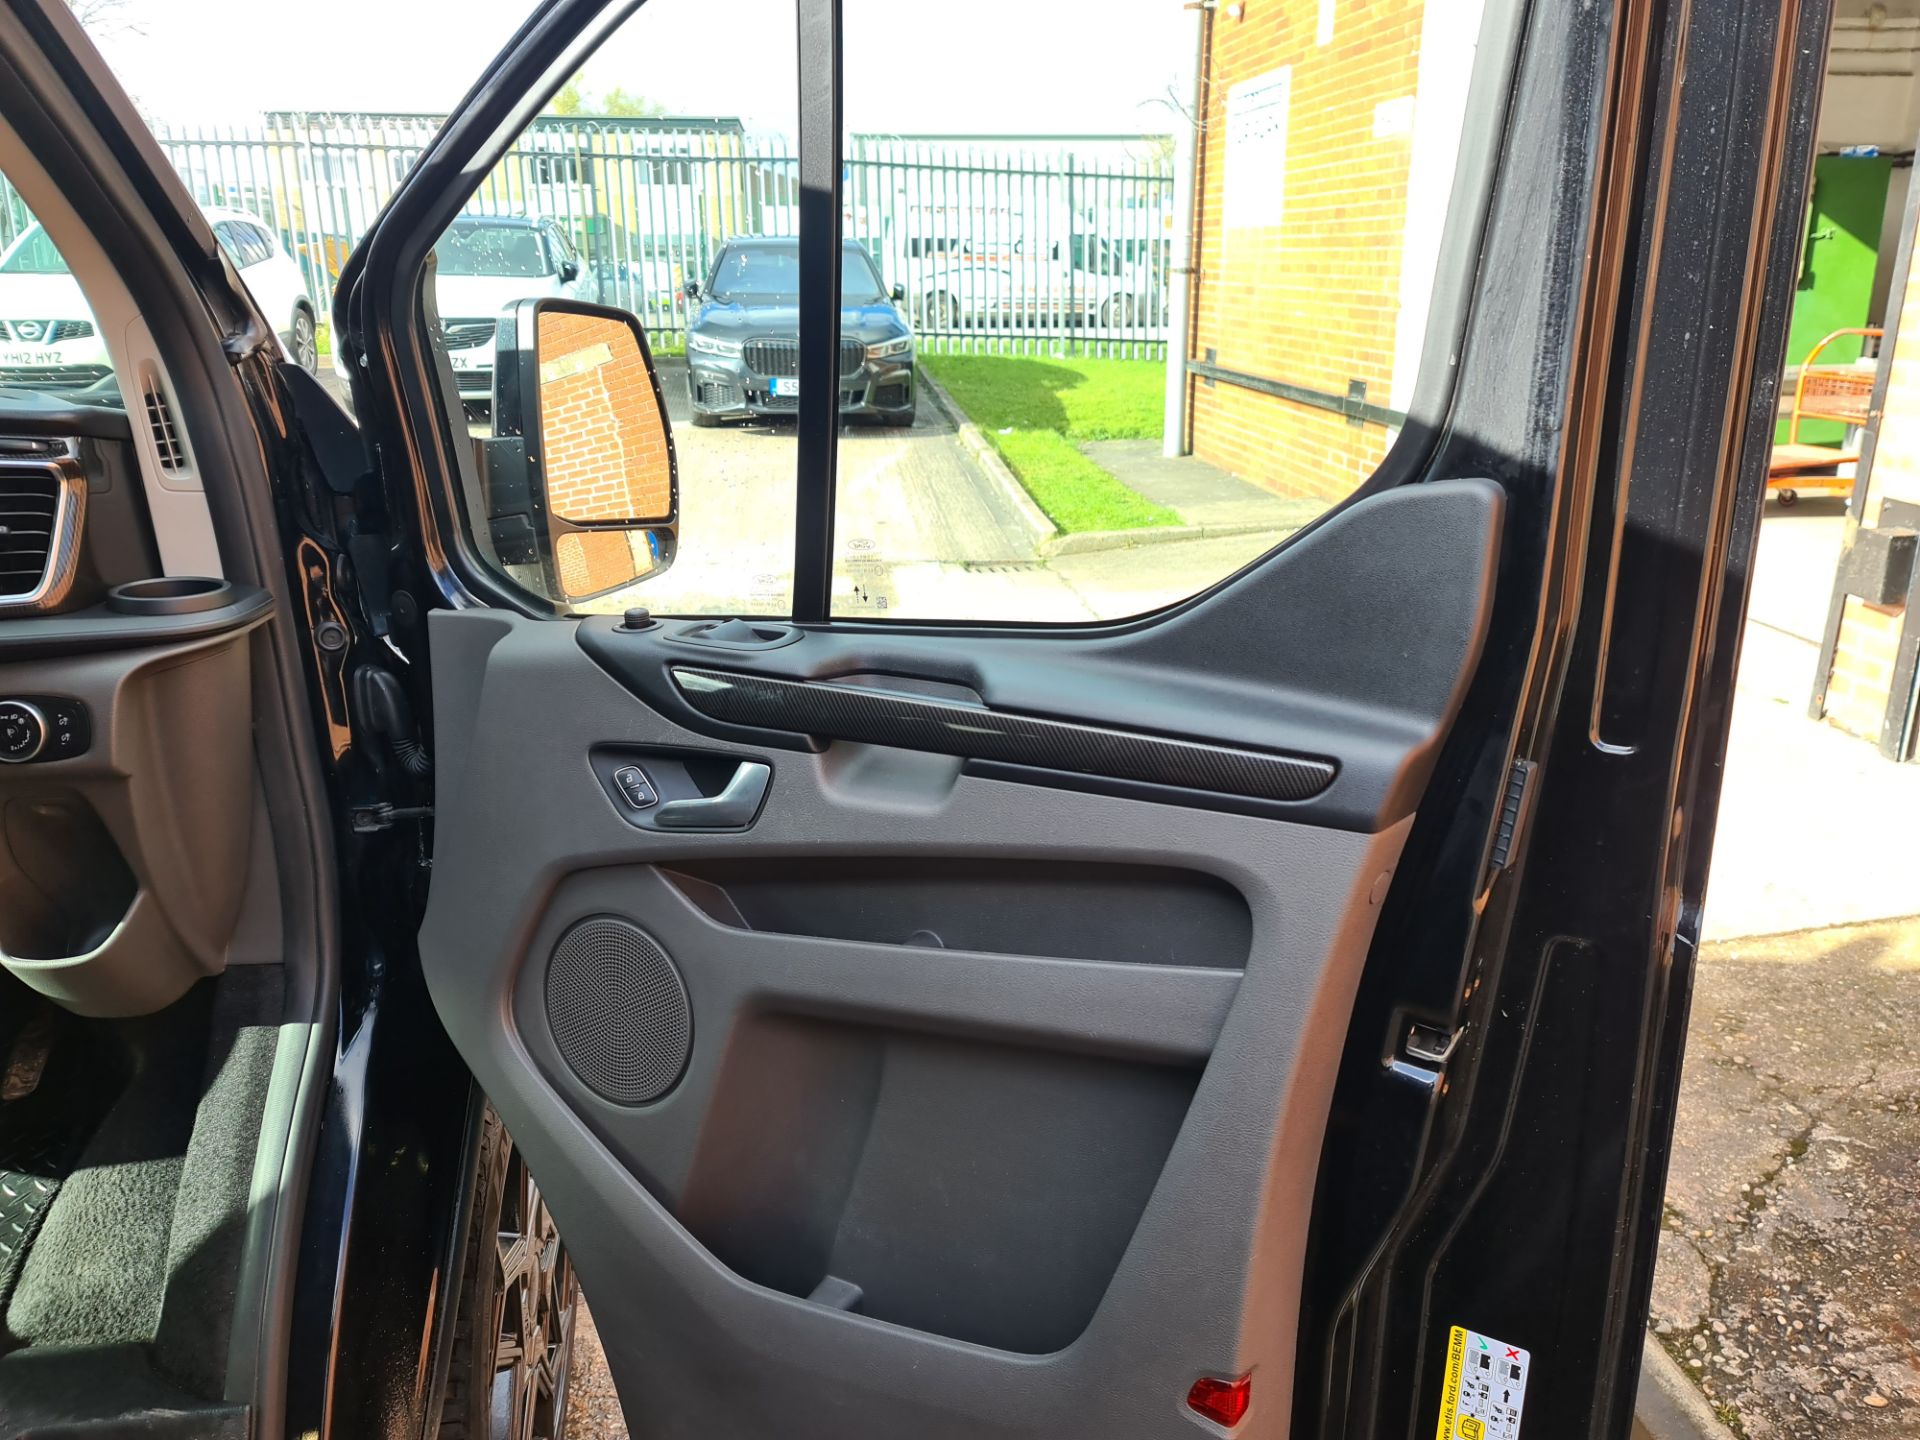 2021 Ford Transit 320LMTD Motion R panel van, auto gearbox, Ultra High Spec - Image 11 of 102